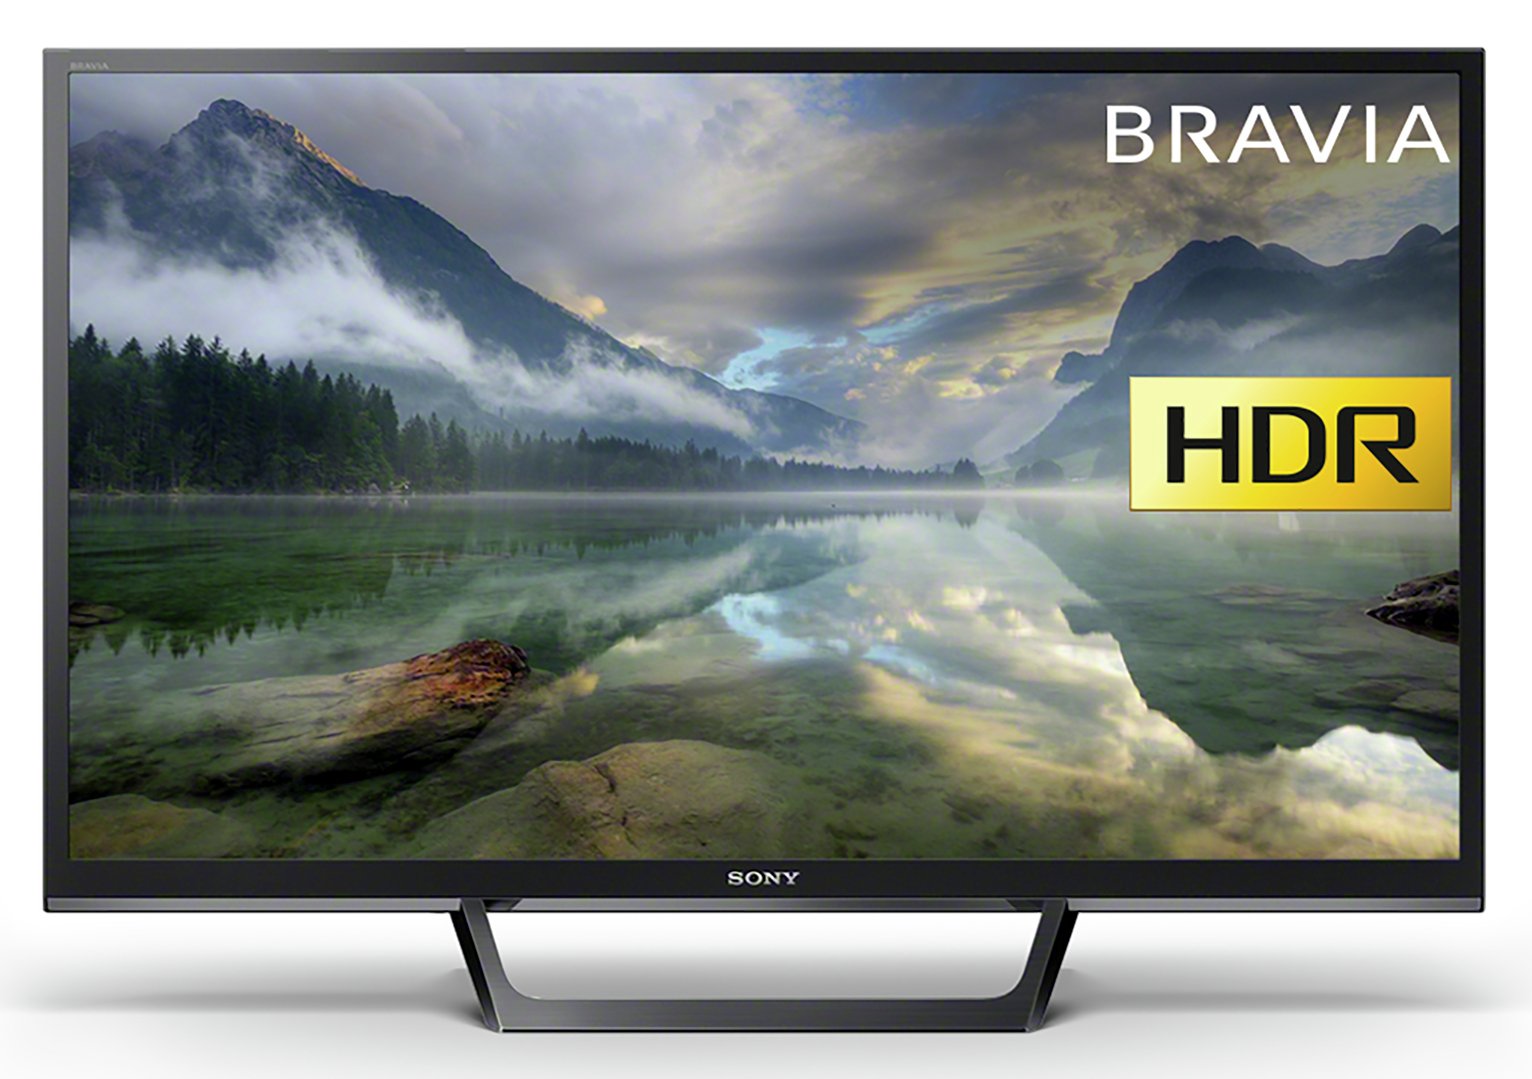 Sony Bravia Kdl32we613bu 32 Inch Smart Hd Ready Tv With Hdr Reviews 5590